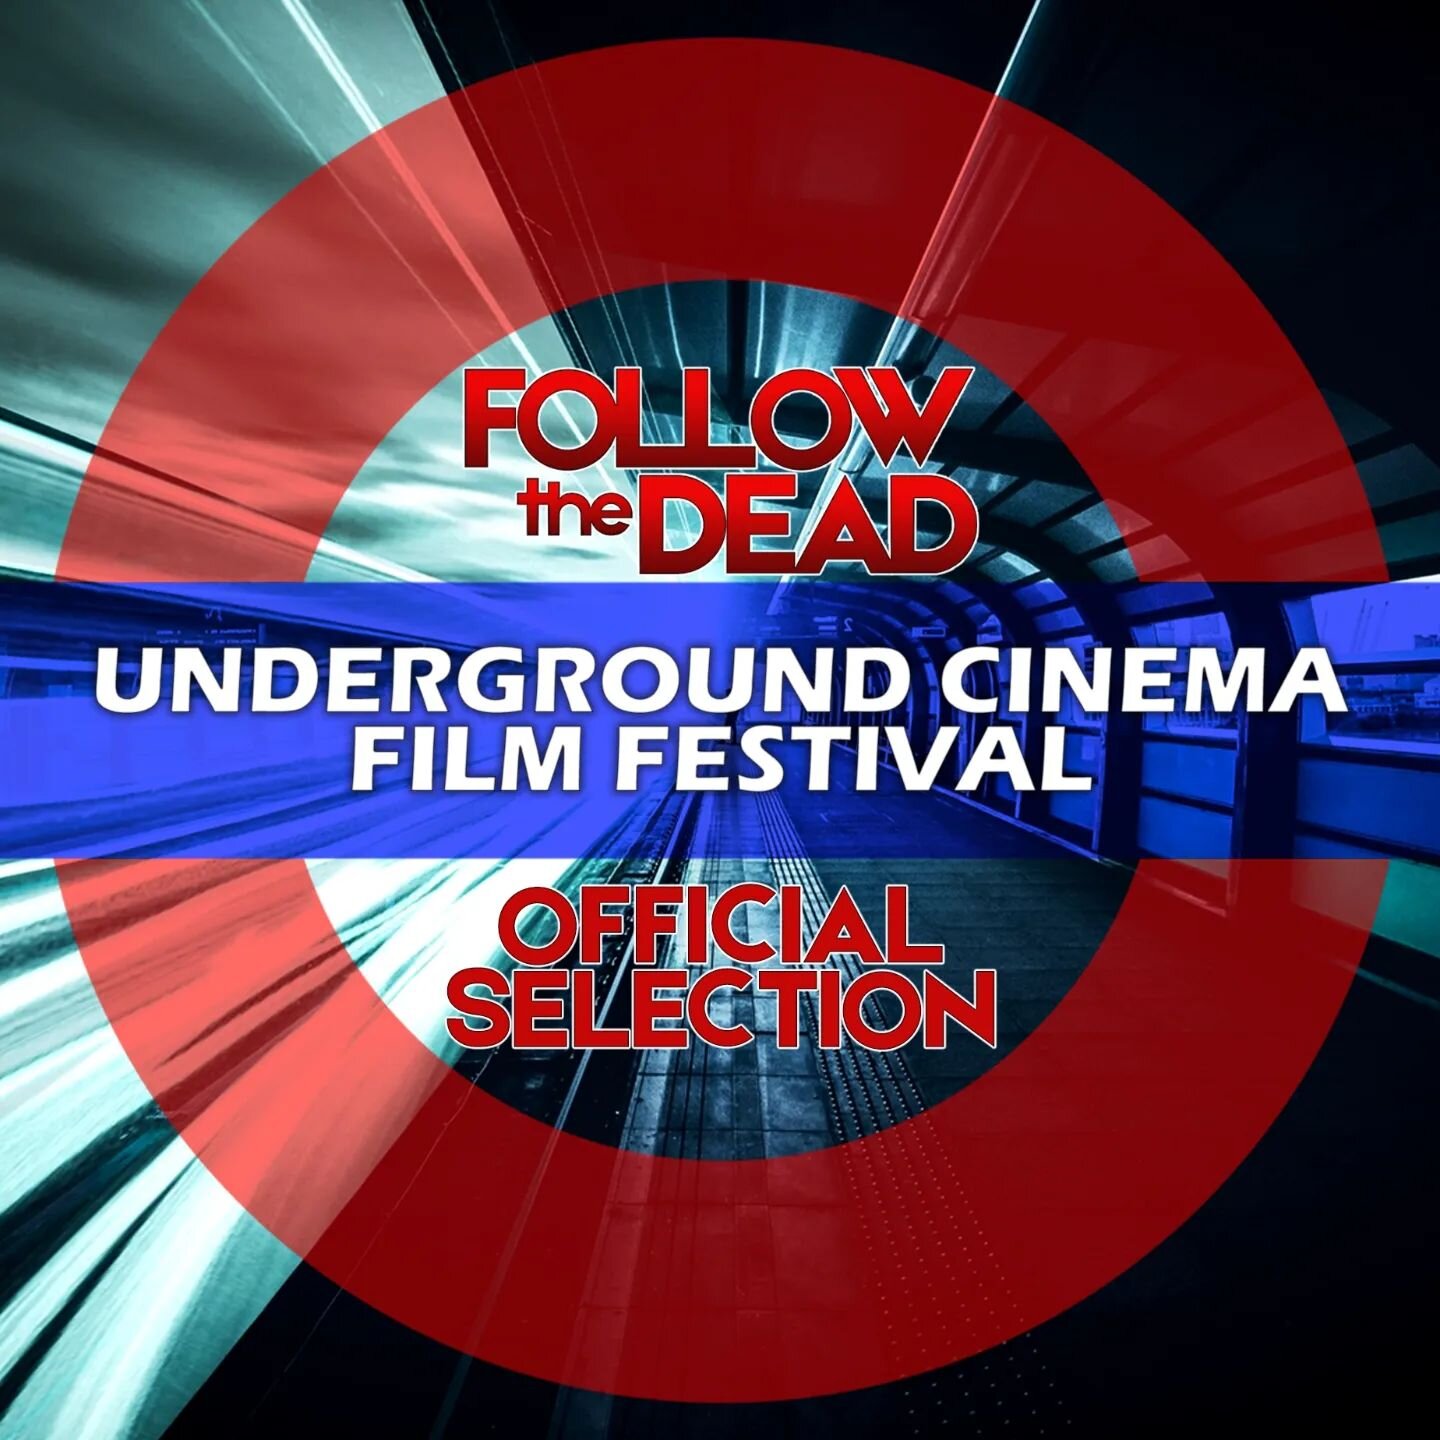 ⭕ OVERJOYED BY UNDERGROUND ⭕

Thank you so much @undergroundcinema for the honour of this official selection. We're thrilled to be screening again in Dublin, and can't wait to get to share the film live and in person with a Dublin audience. We're abs